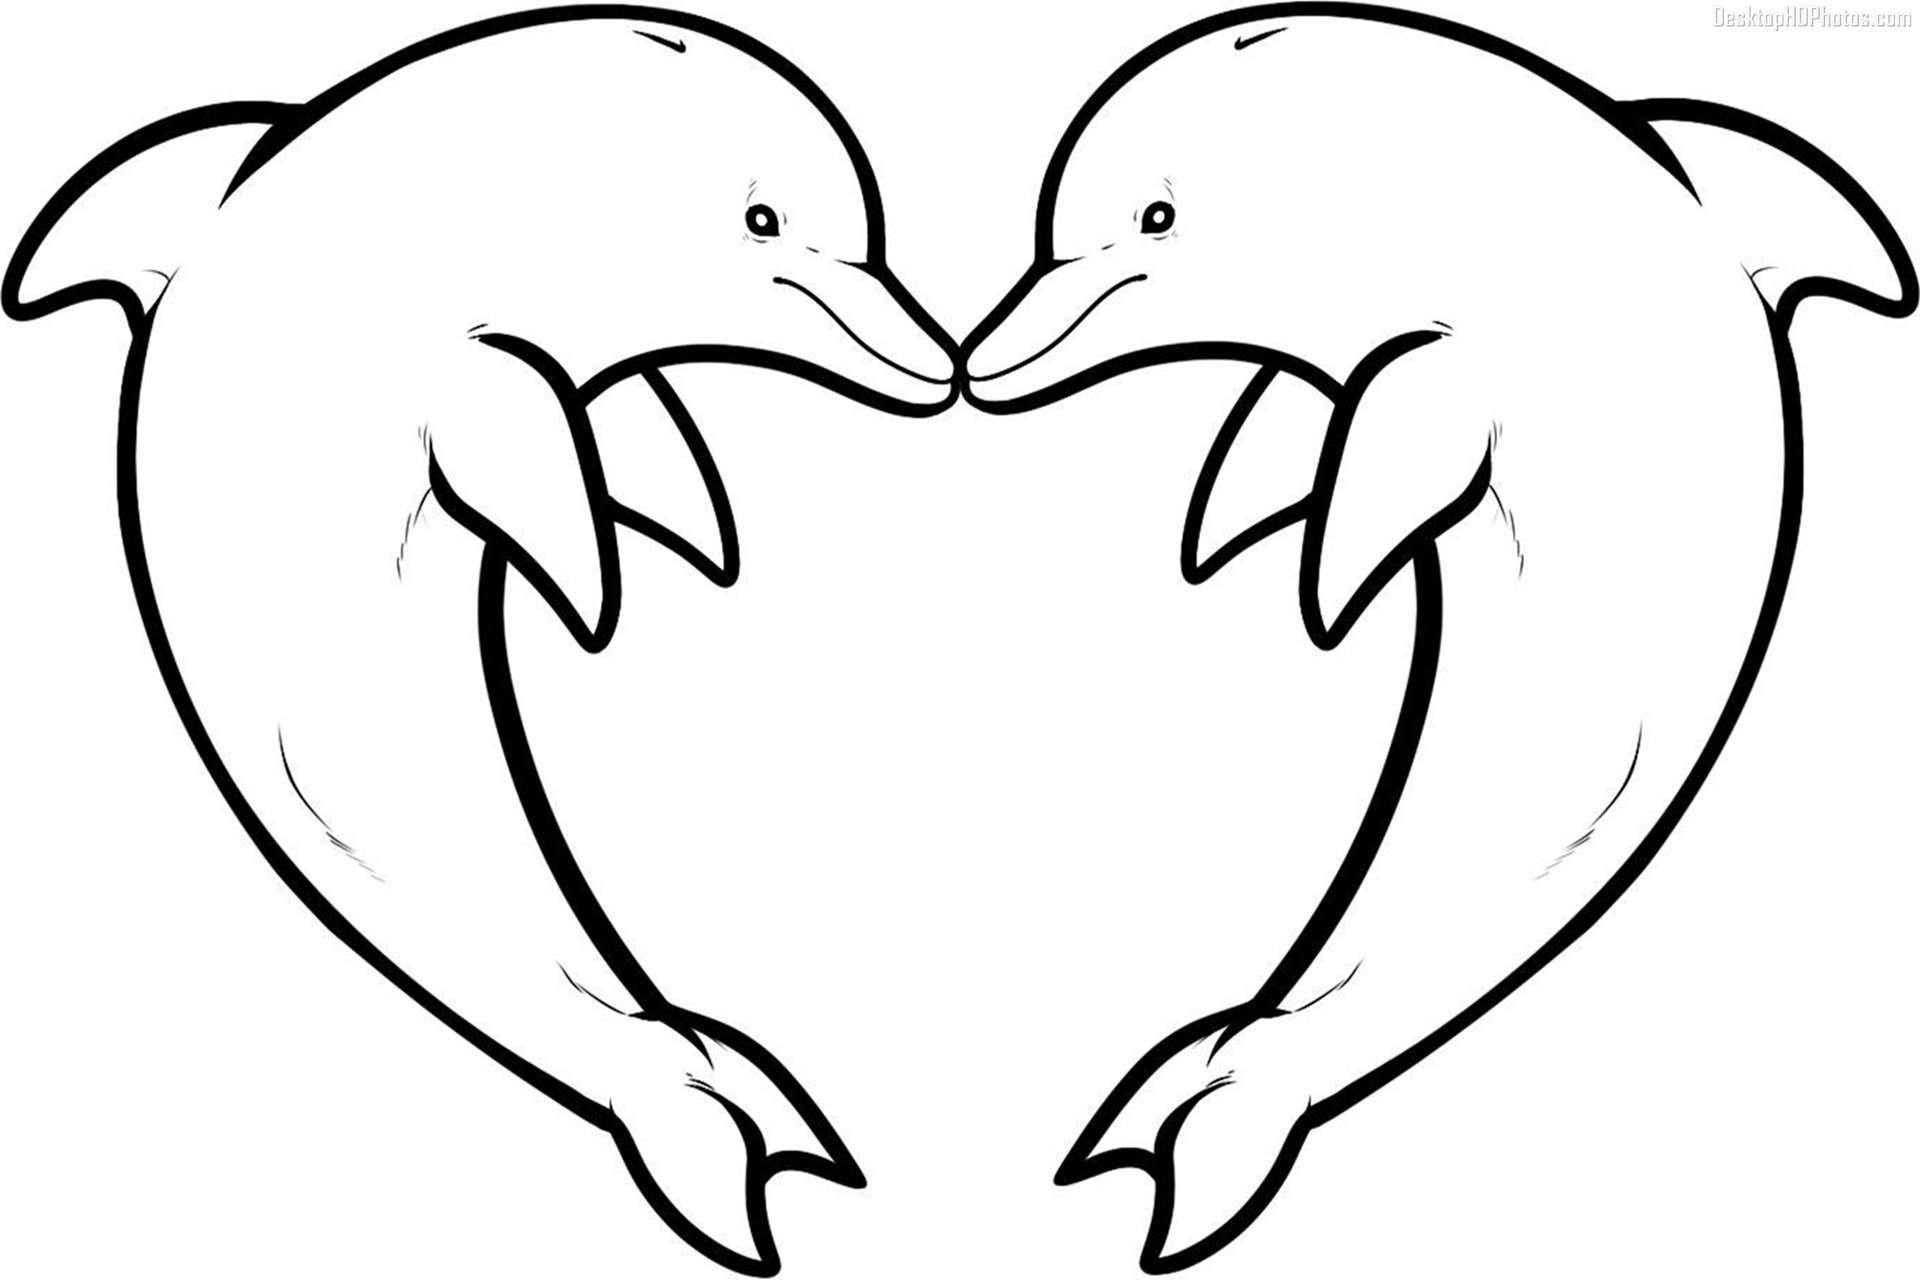 Coloring Pages : Dolphins Coloring Pages Dolphin To Print Out - Dolphin Coloring Sheets Free Printable